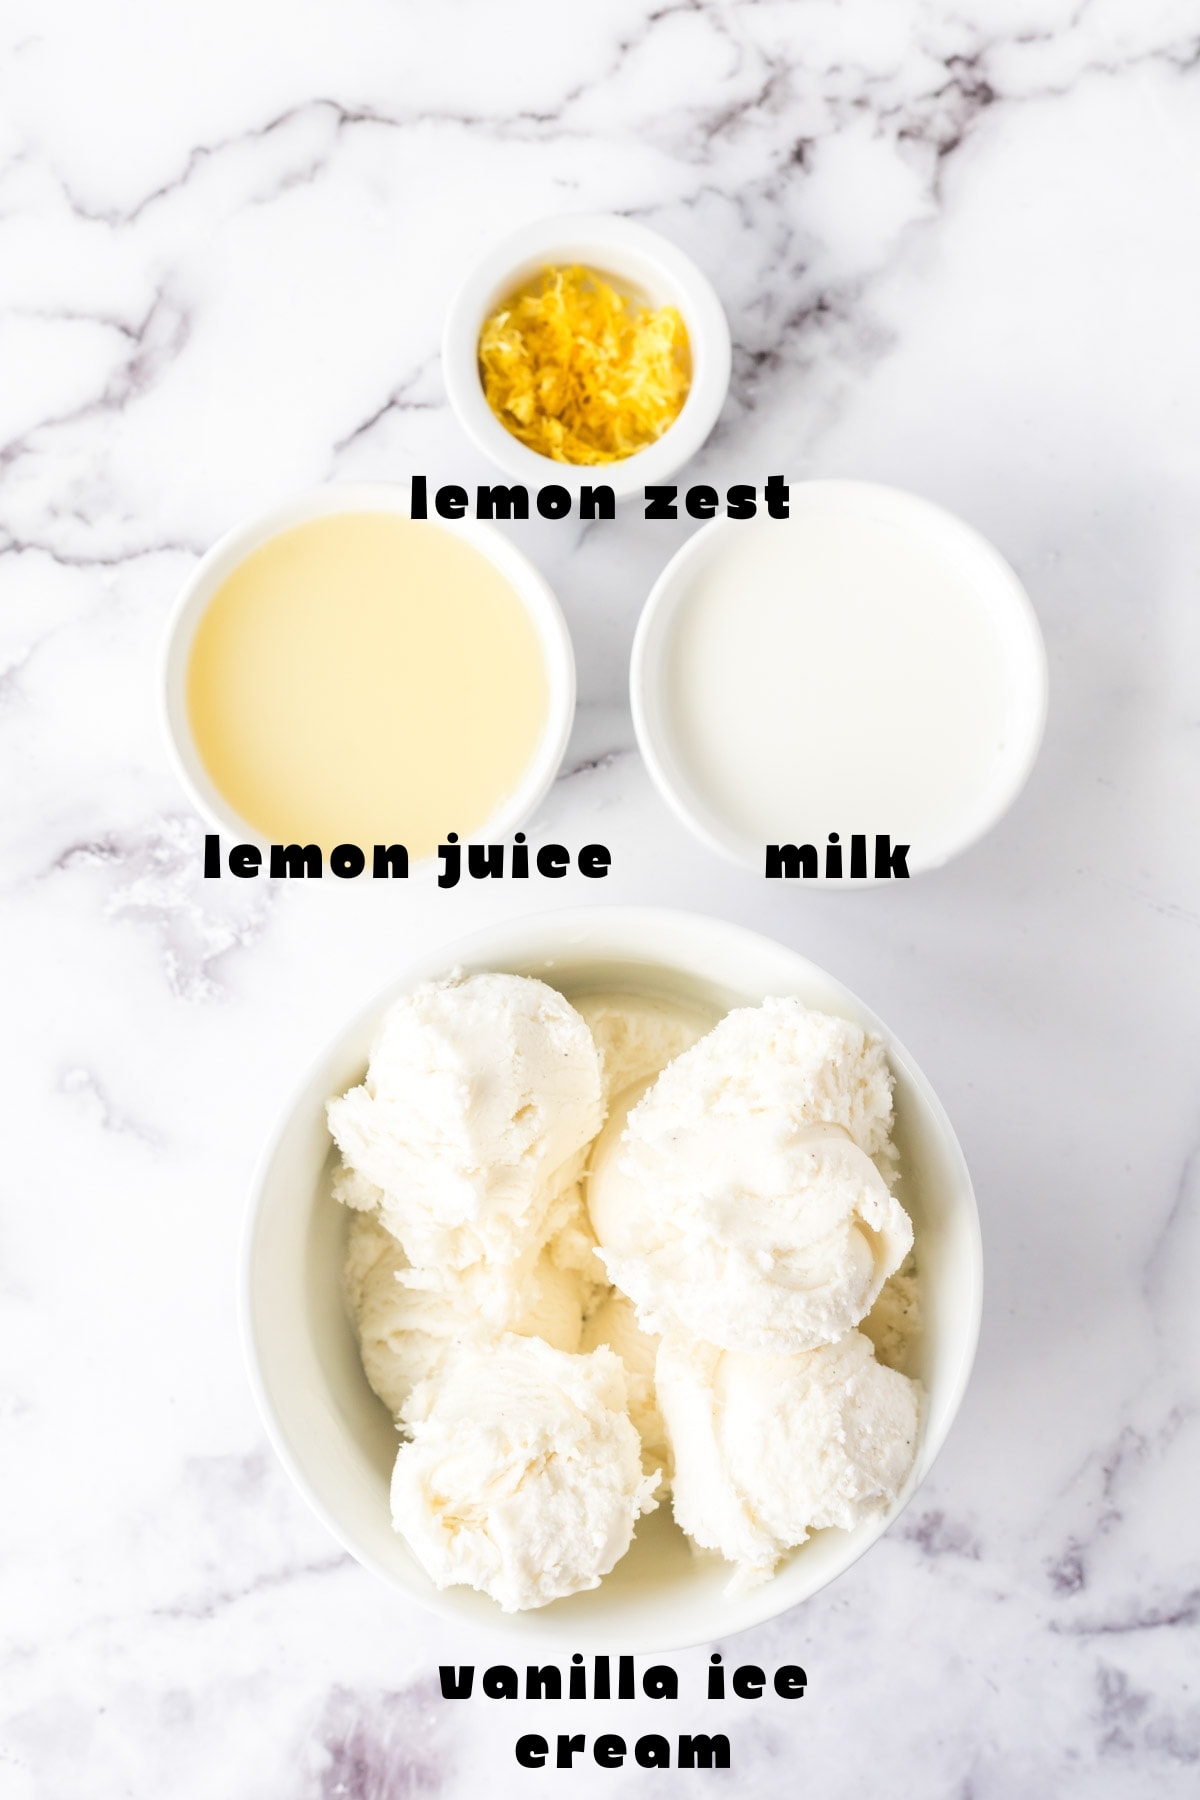 Labeled image of ingredients needed for frosted lemonade.